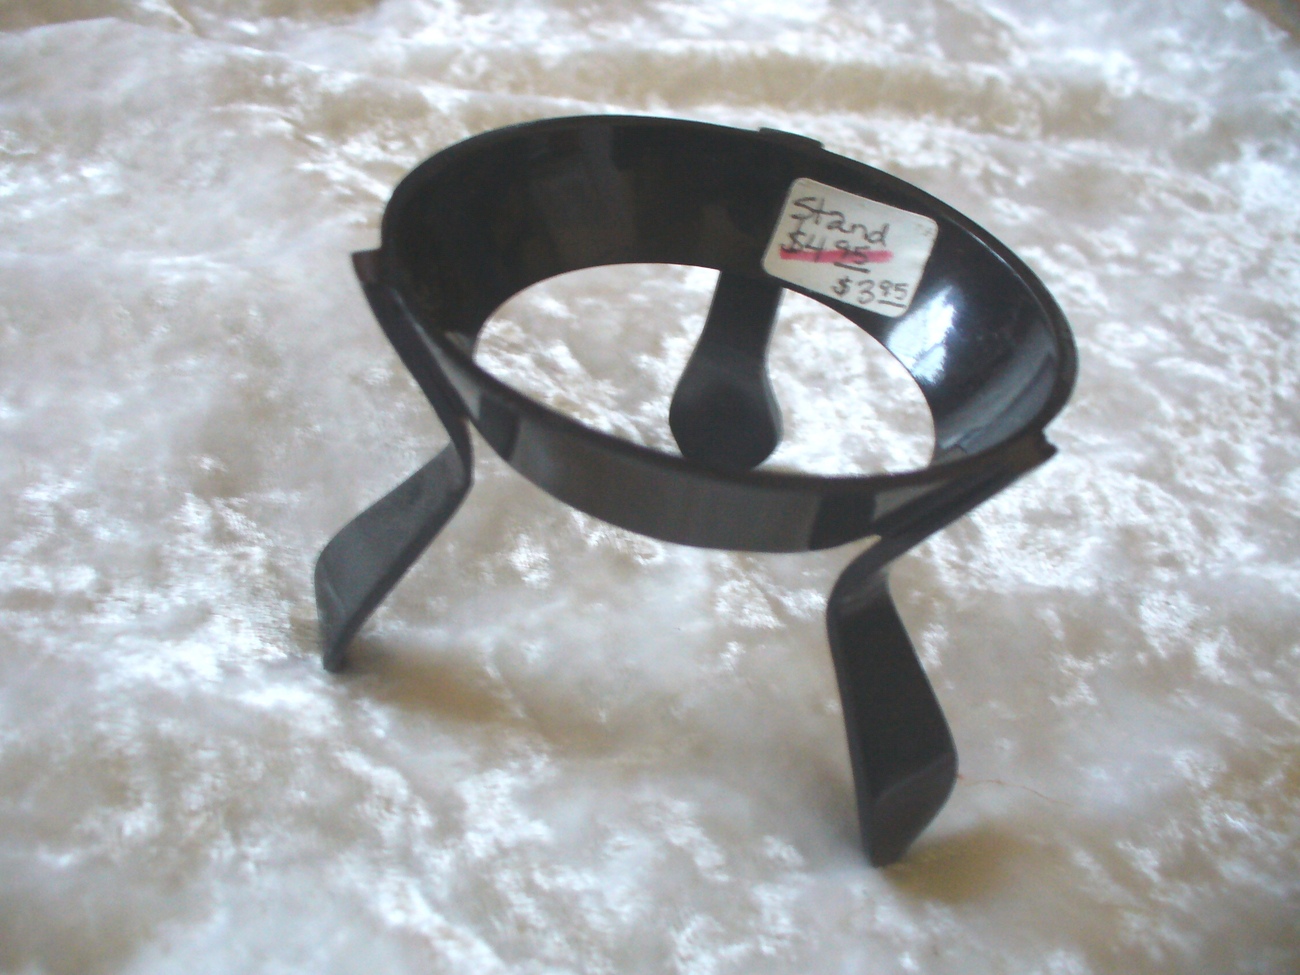 Wraught Iron Globe or Candle Holder - $3.20